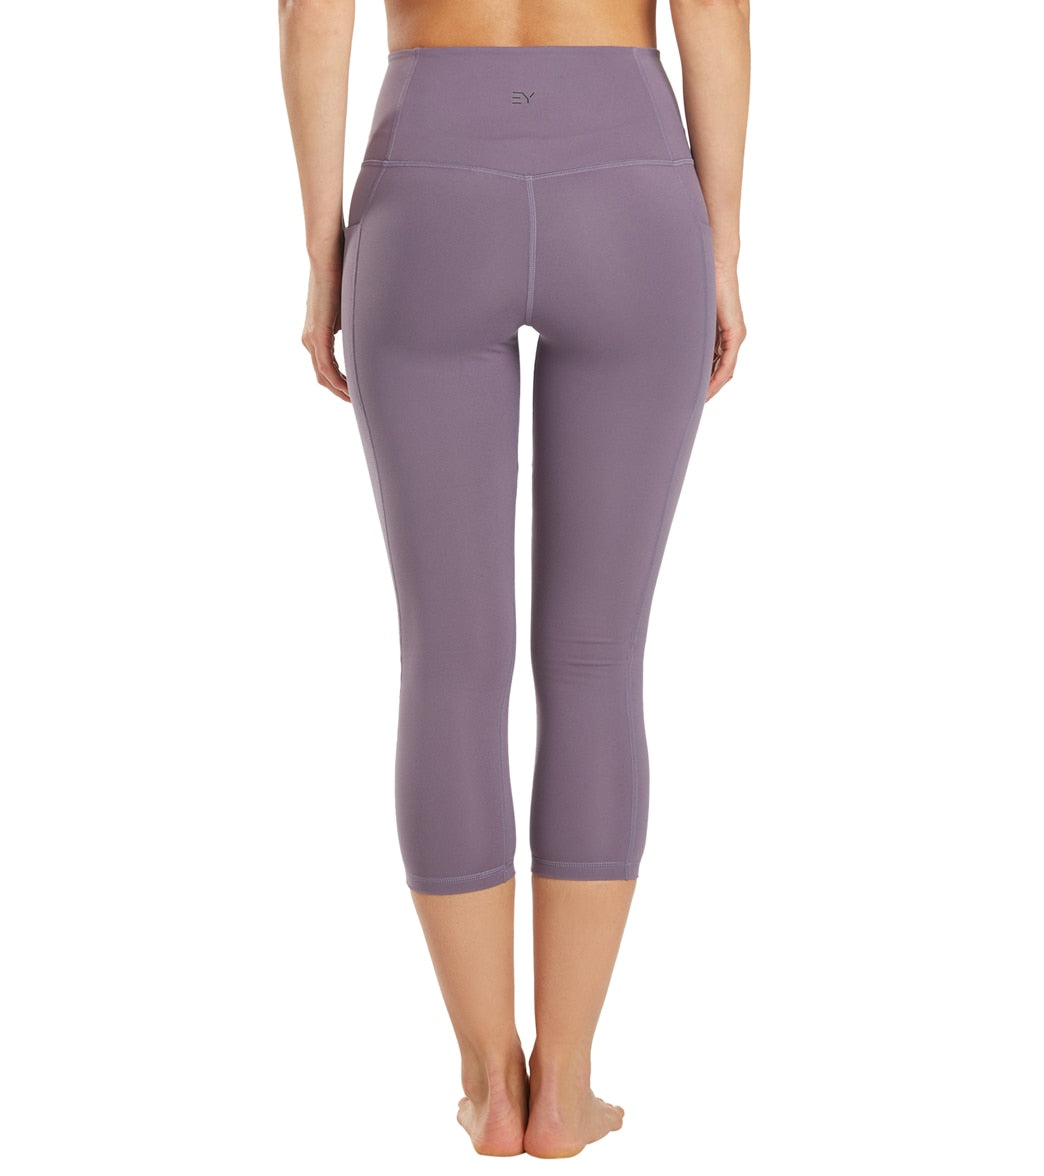 Simple Addiction - 😘 Your favorite Capri Leggings are now available  starting at just $8.95! Capri Leggings: SimpleAddiction .com/collections/capri-leggings